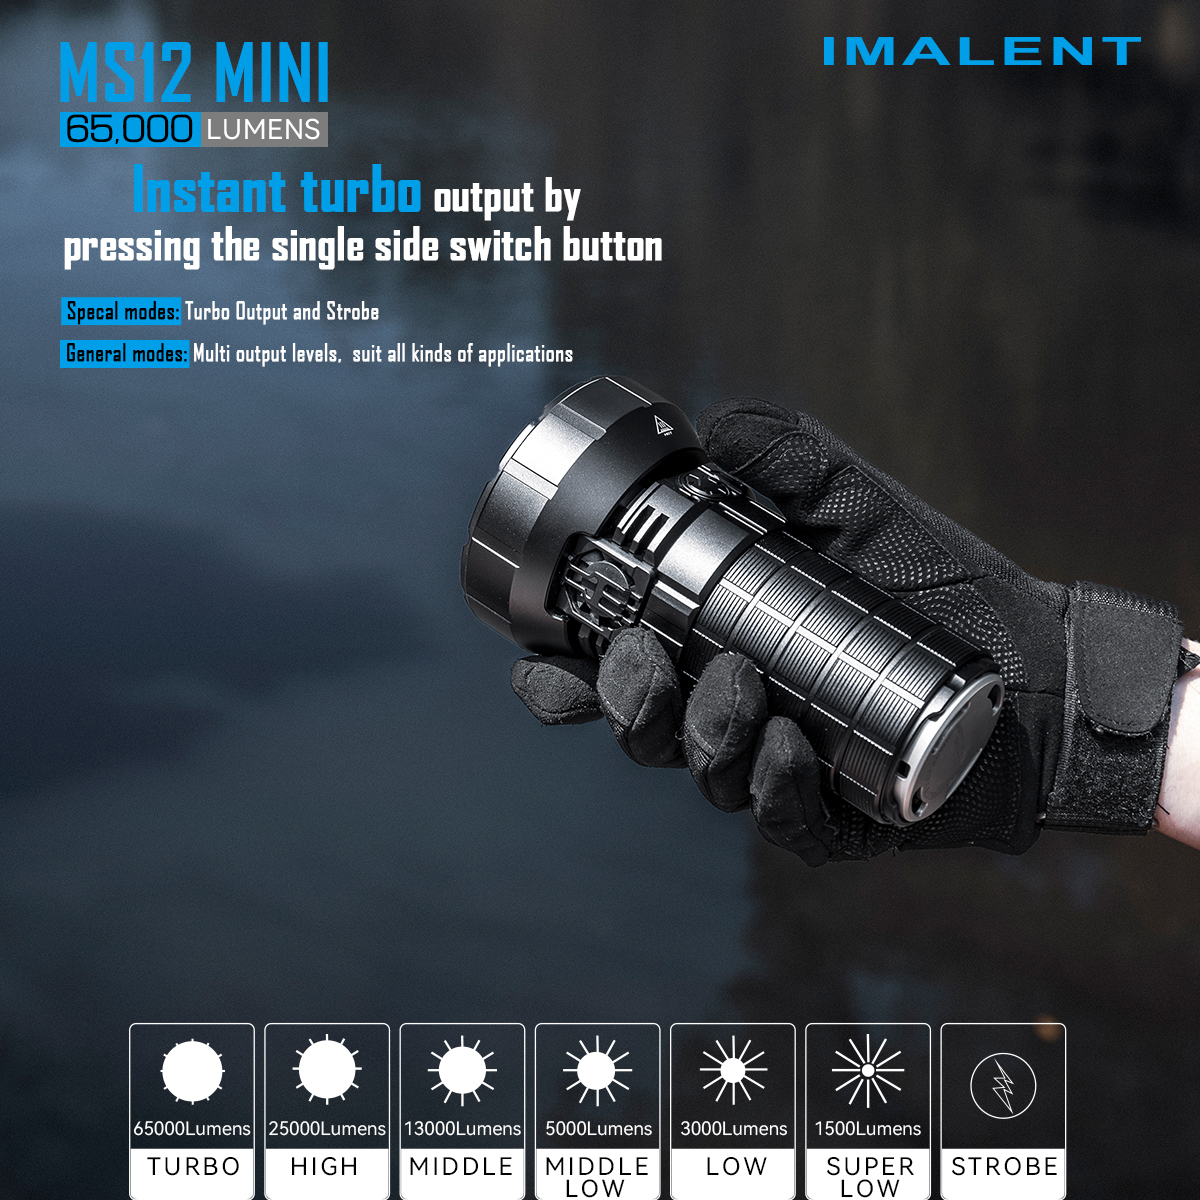 IMALENT-MS12-MINI-65000LM-Flashlight-With-12-Pieces-XHP702-LED-Portable-EDC-IP56-Waterproof-Led-Torc-1940968-7